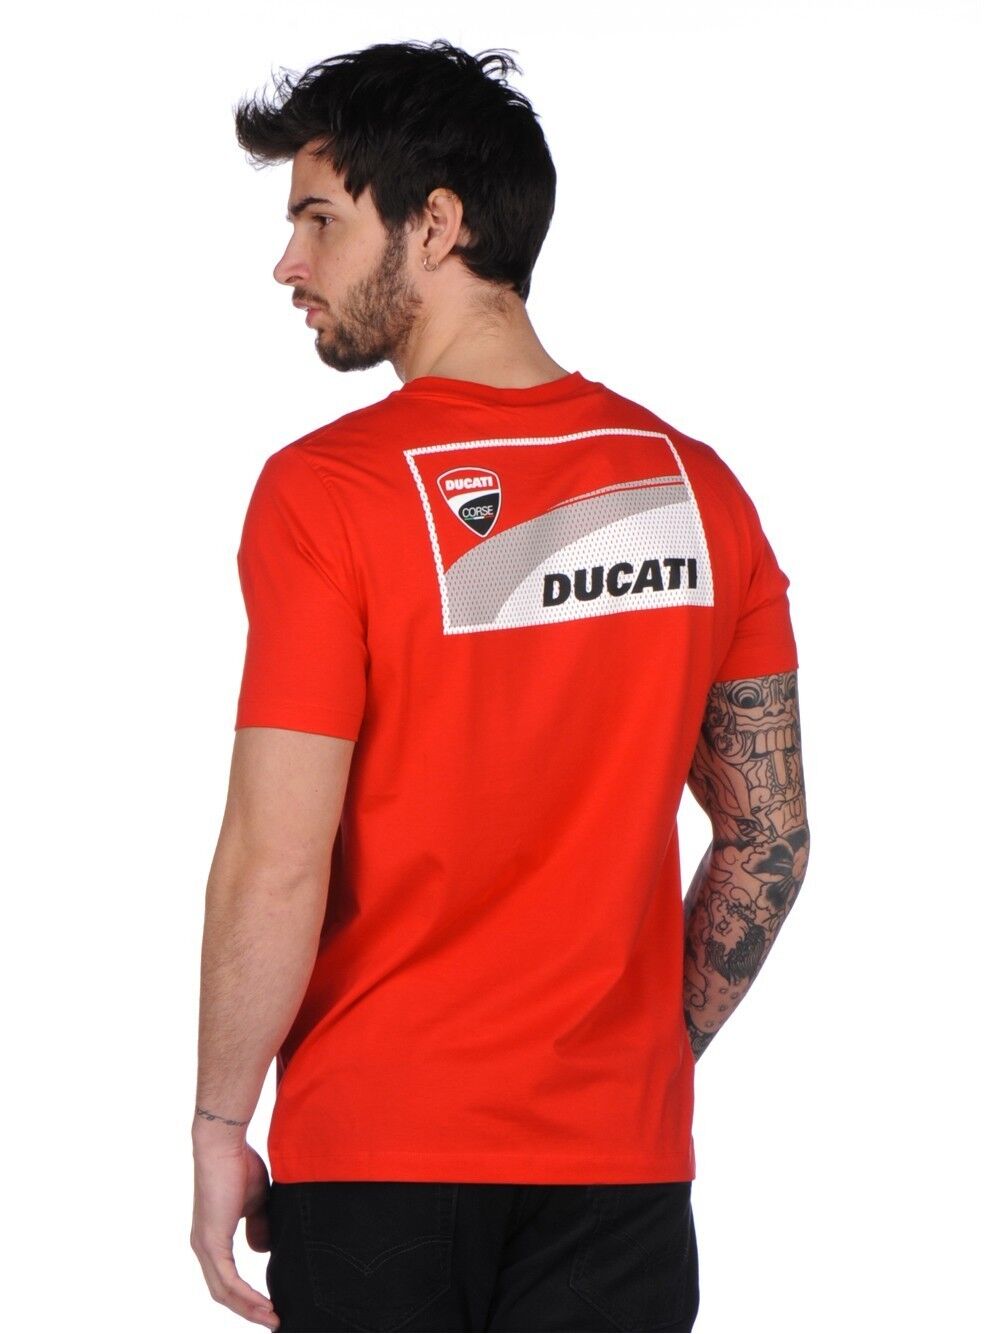 Official Ducati Corse Official Man's Red T'shirt - 17 36002